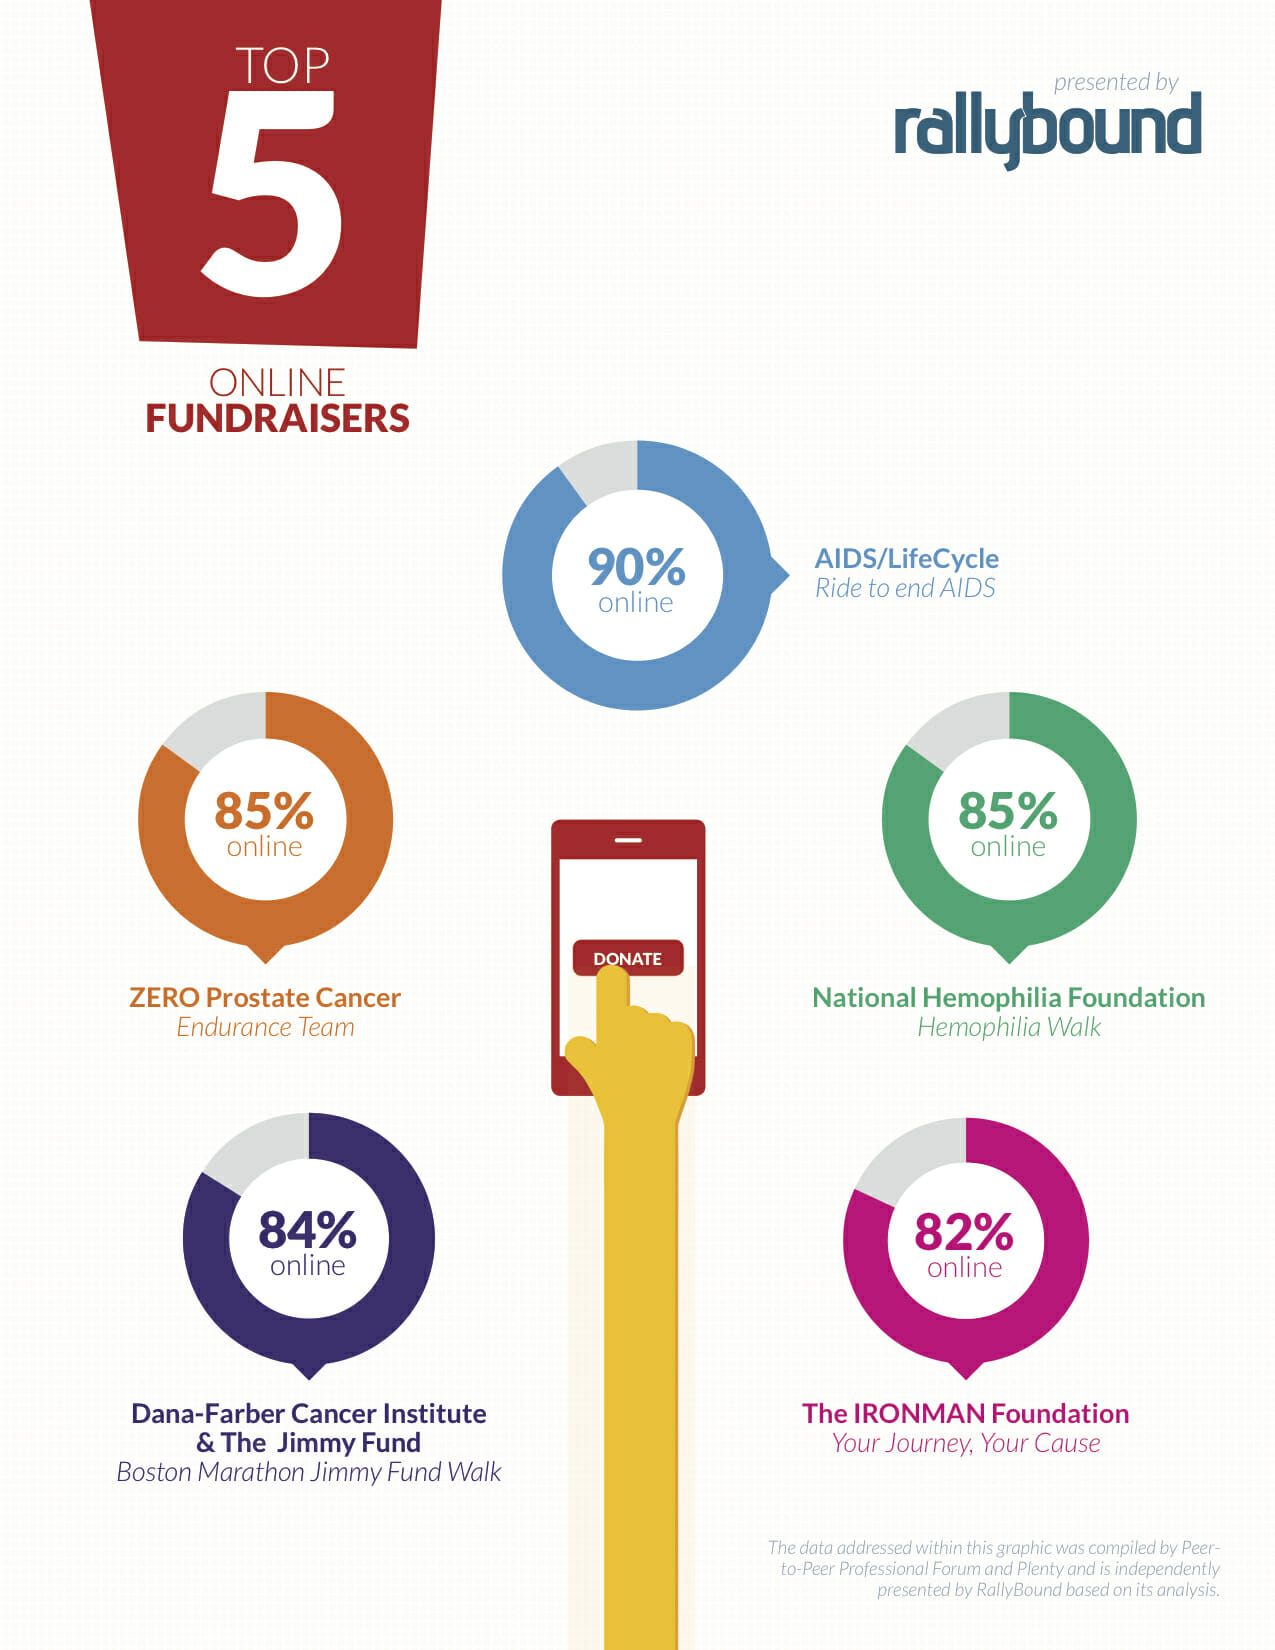 Top 5 Online Fundraisers in 2014